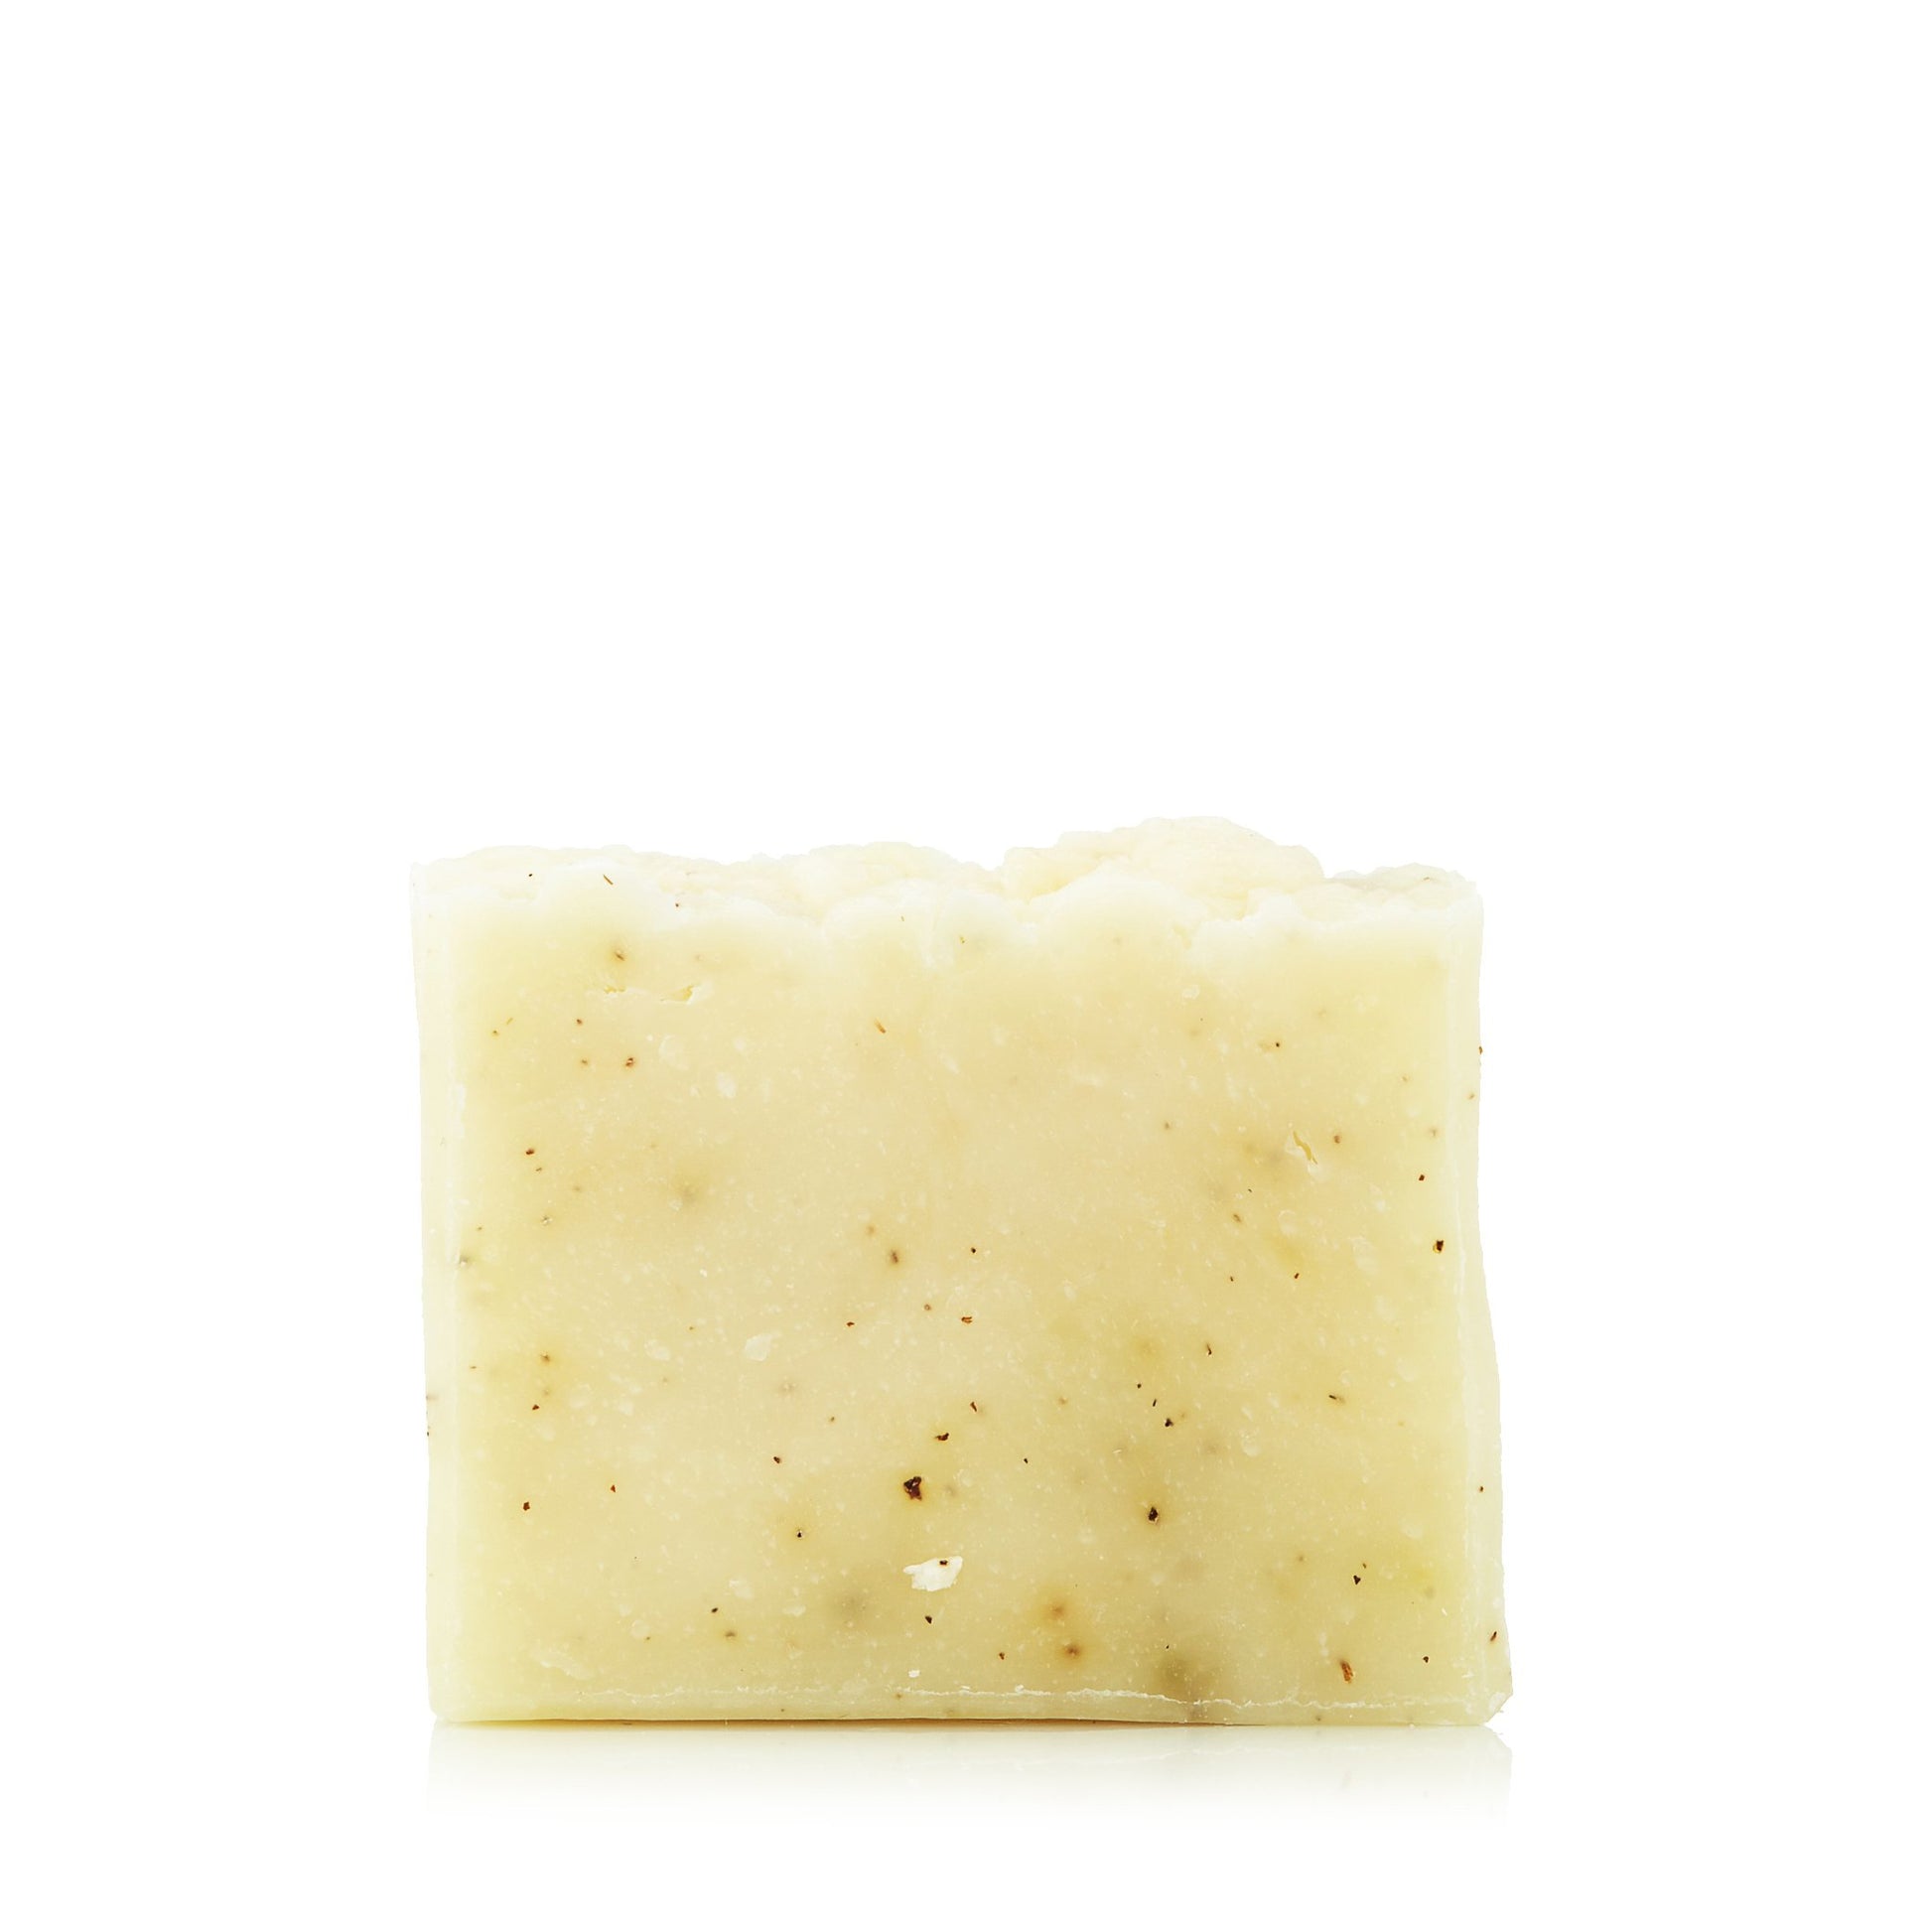 Eucalyptus Mint Hand Made Soap by The Thx Co. Click to open in modal